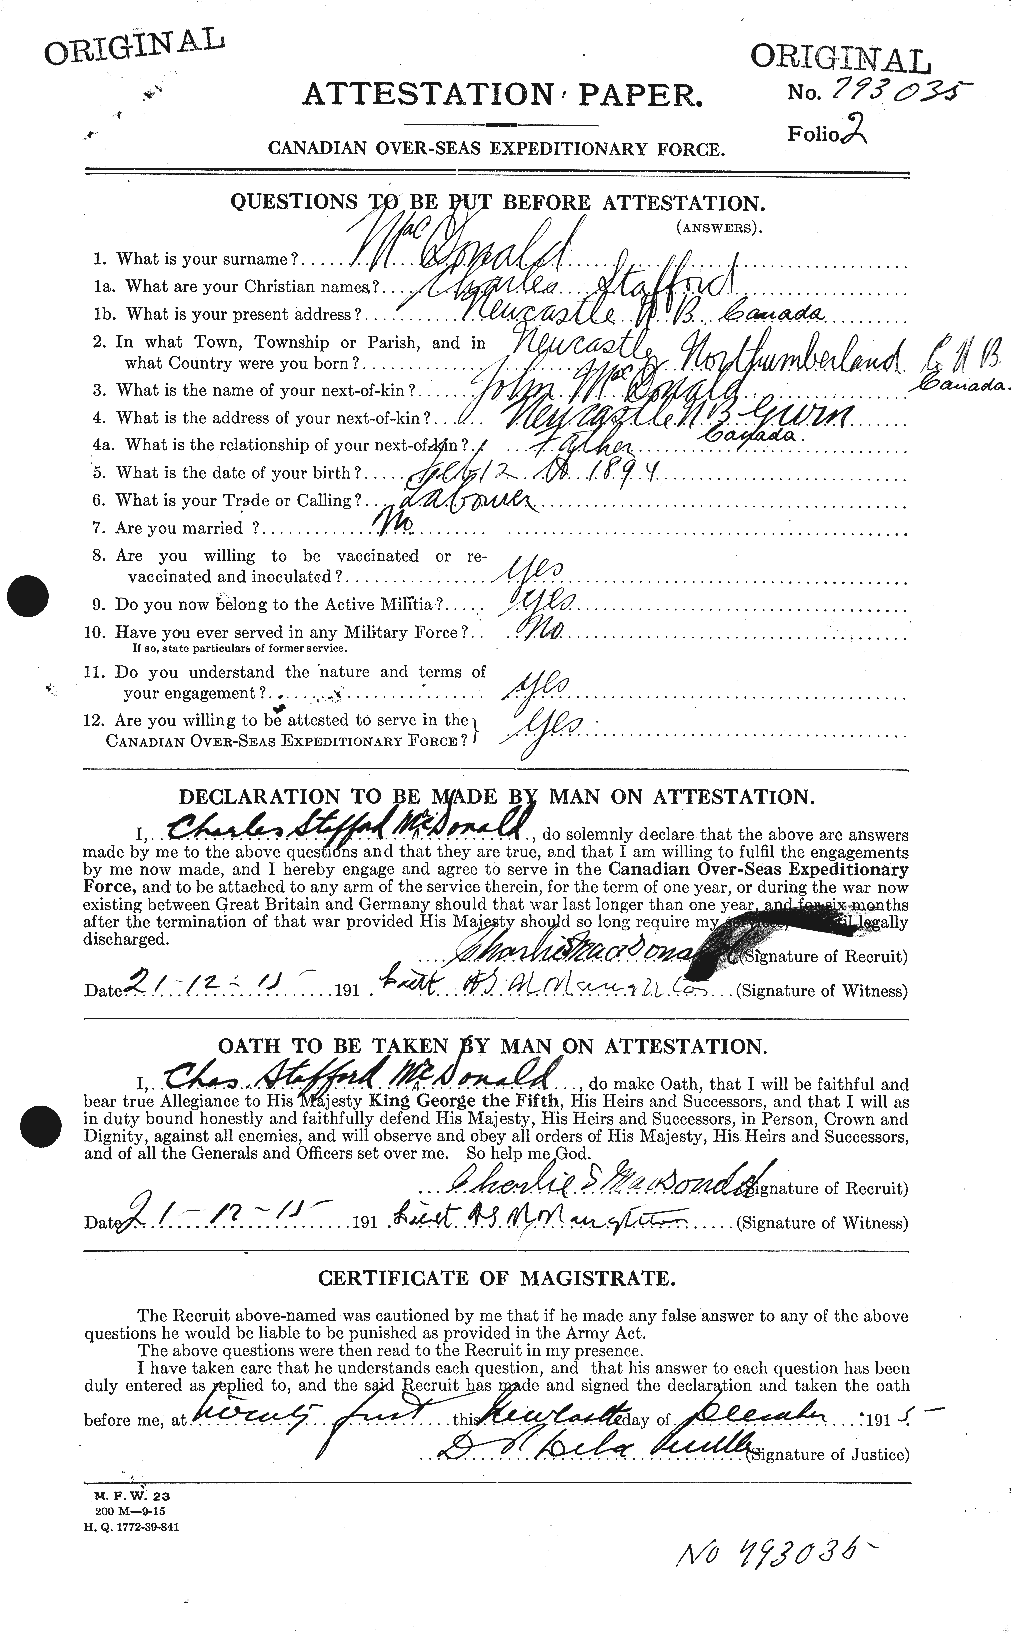 Personnel Records of the First World War - CEF 136381a